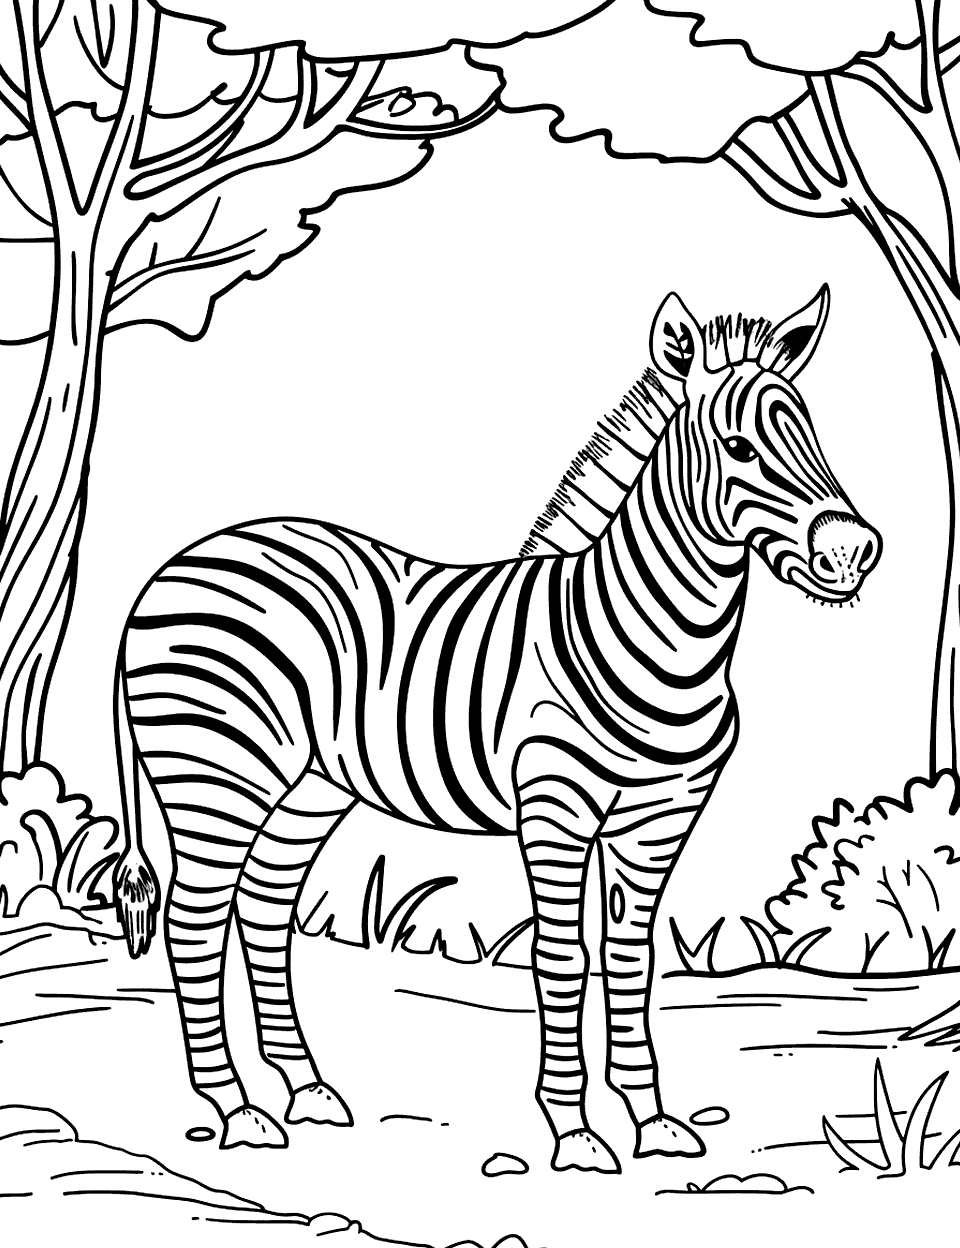 Zebra in a Clearing Coloring Page - A zebra standing alone in a clearing surrounded by trees.